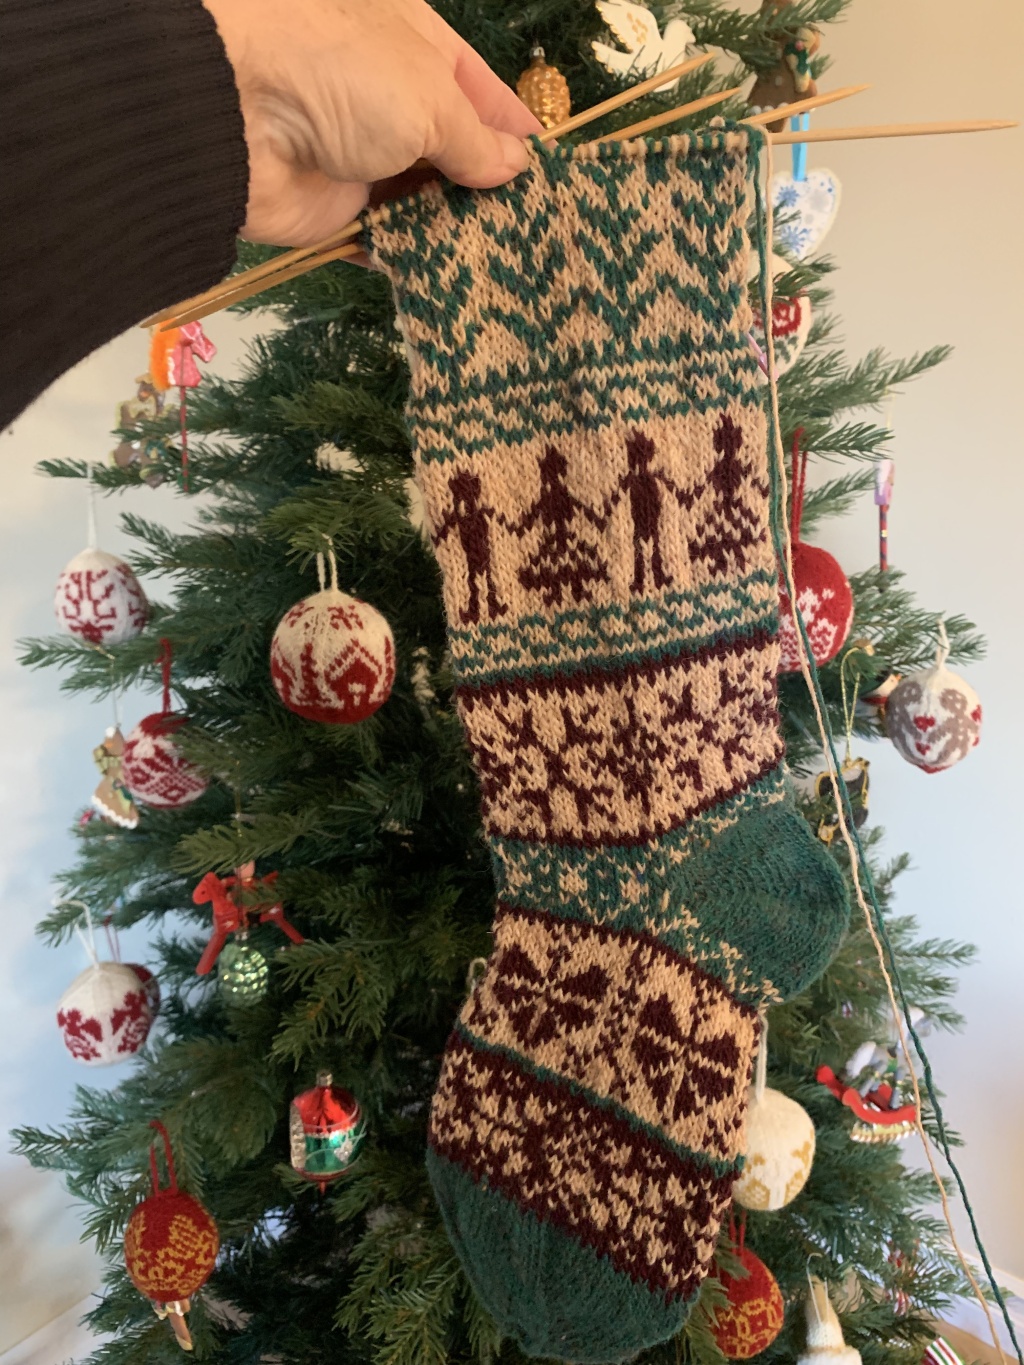 Day 21 of Advent Sock